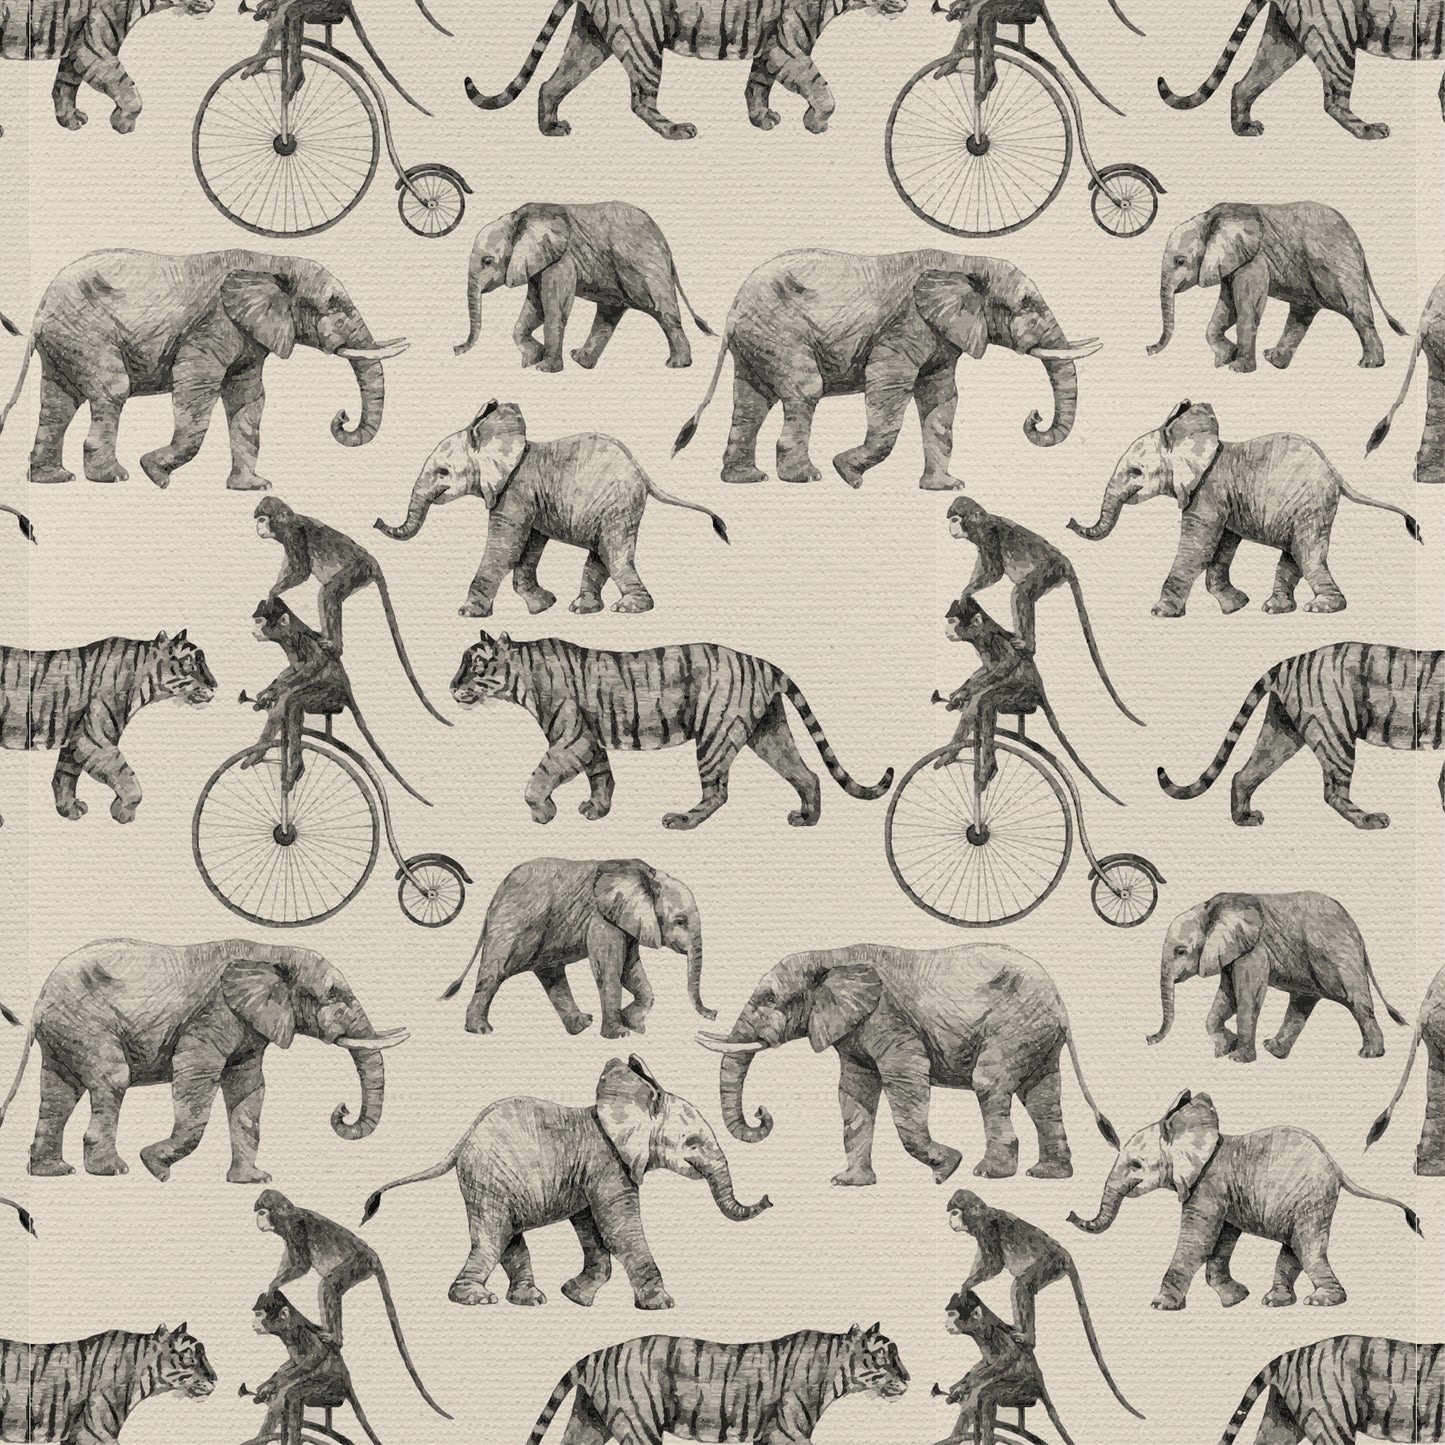 Life Is A Circus Removable Peel And Stick Wallpaper